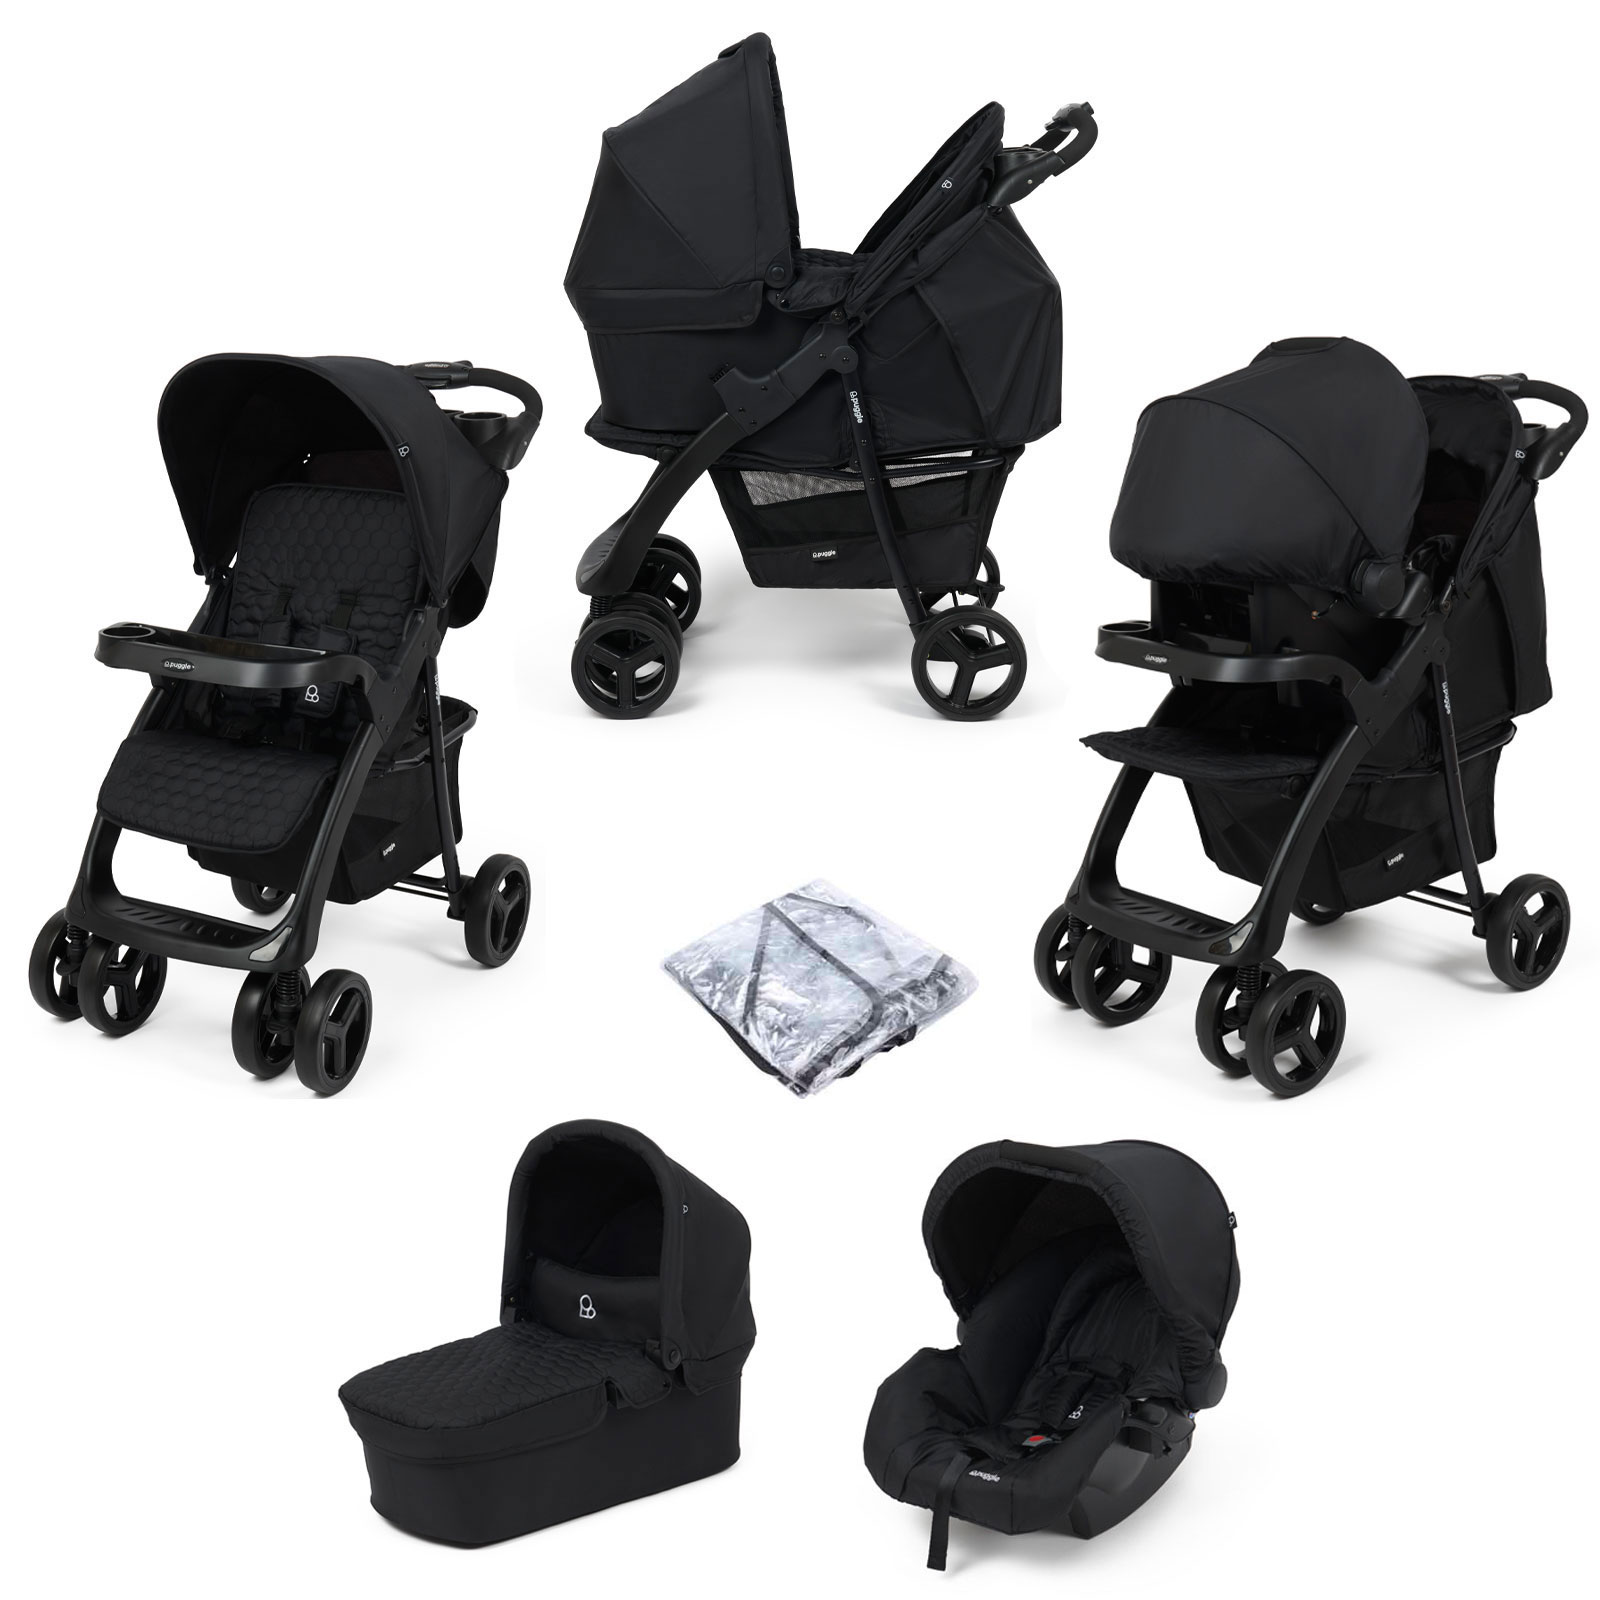 Puggle Denver Luxe 3in1 Travel System with Raincover - Storm Black